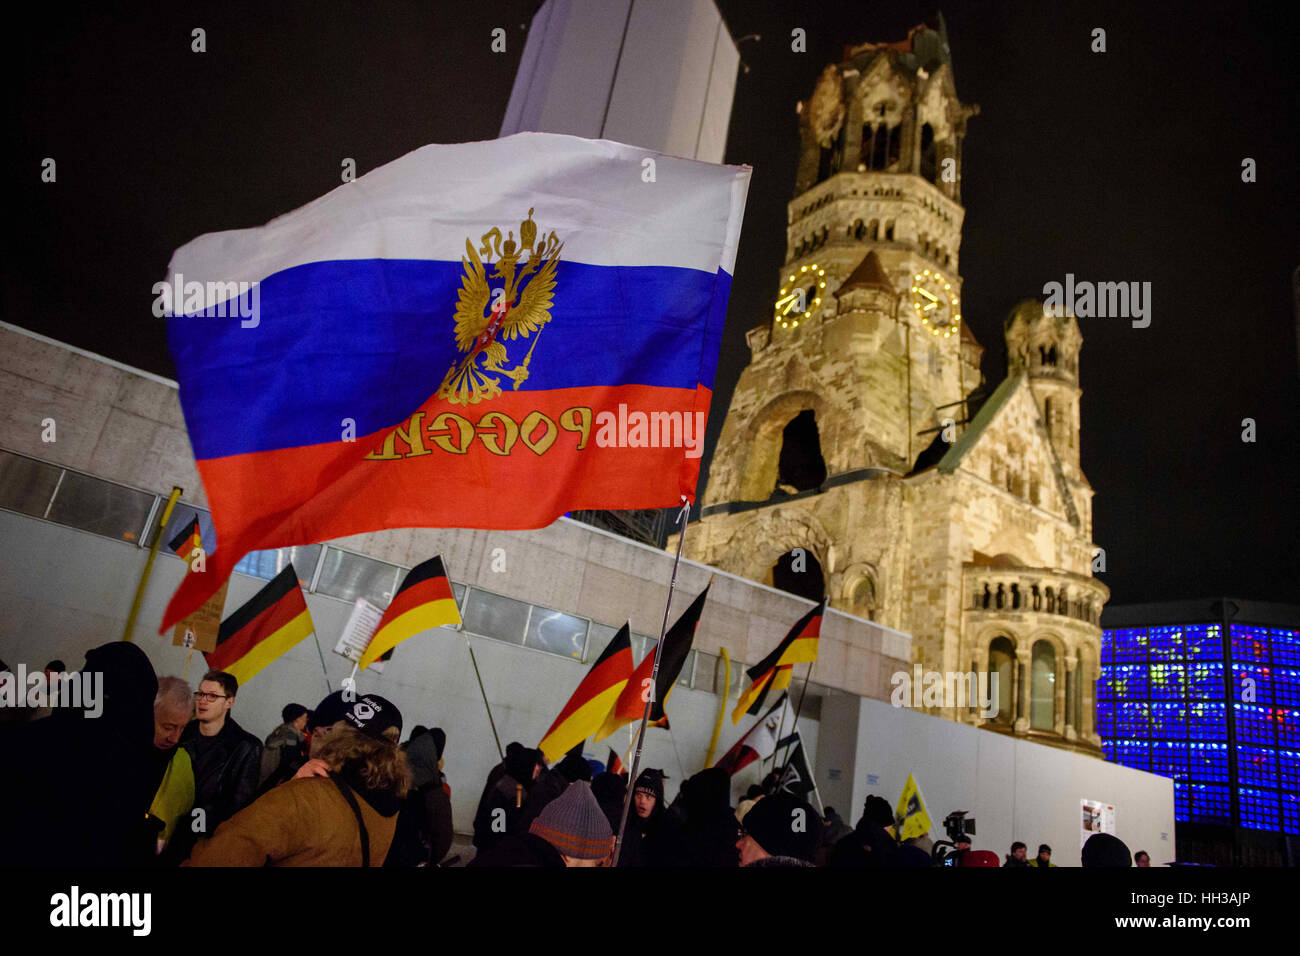 Berlin, Germany. 16th Jan, 2017. A Russian and several German flags at a demonstration by the Baergida (Berlin Patriots Against the Islamization of the Occident) group outside the Memorial Church at Breitscheidplatz in Berlin, Germany, 16 January 2017. Photo: Gregor Fischer/dpa/Alamy Live News Stock Photo